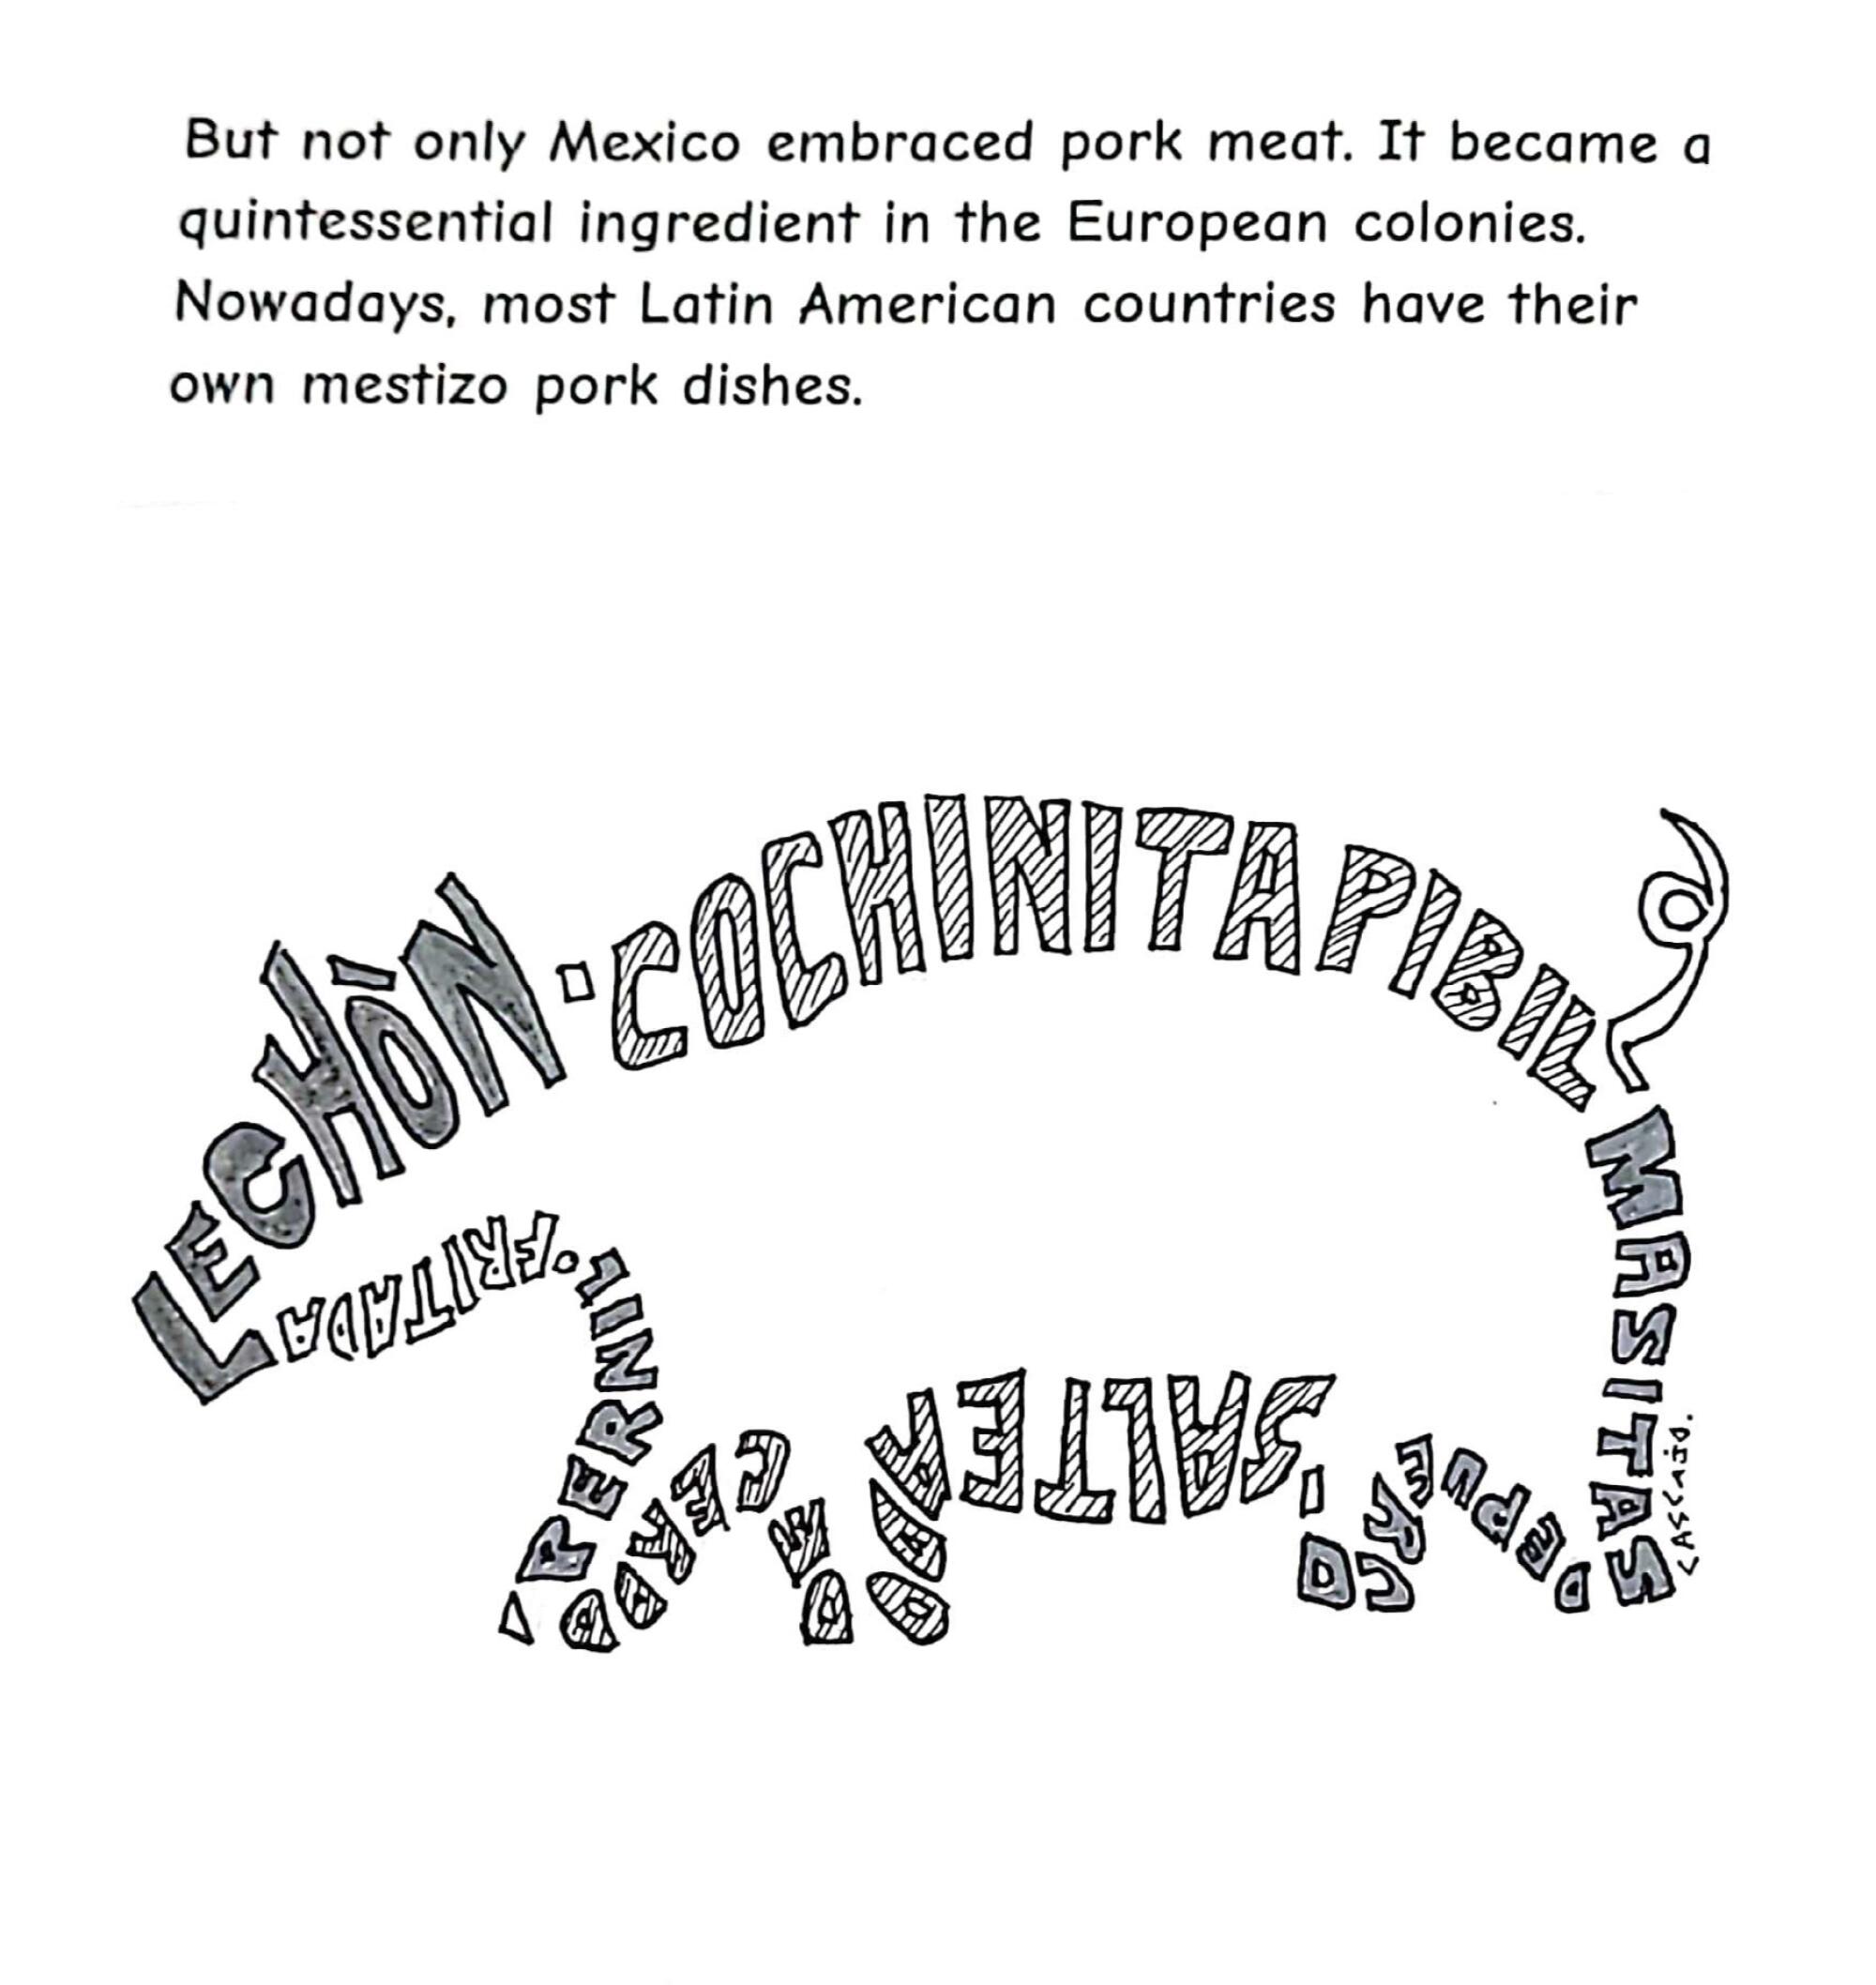 But not only Mexico embraced pork meat. Nowadays most Latin American countries have their own pork dishes.